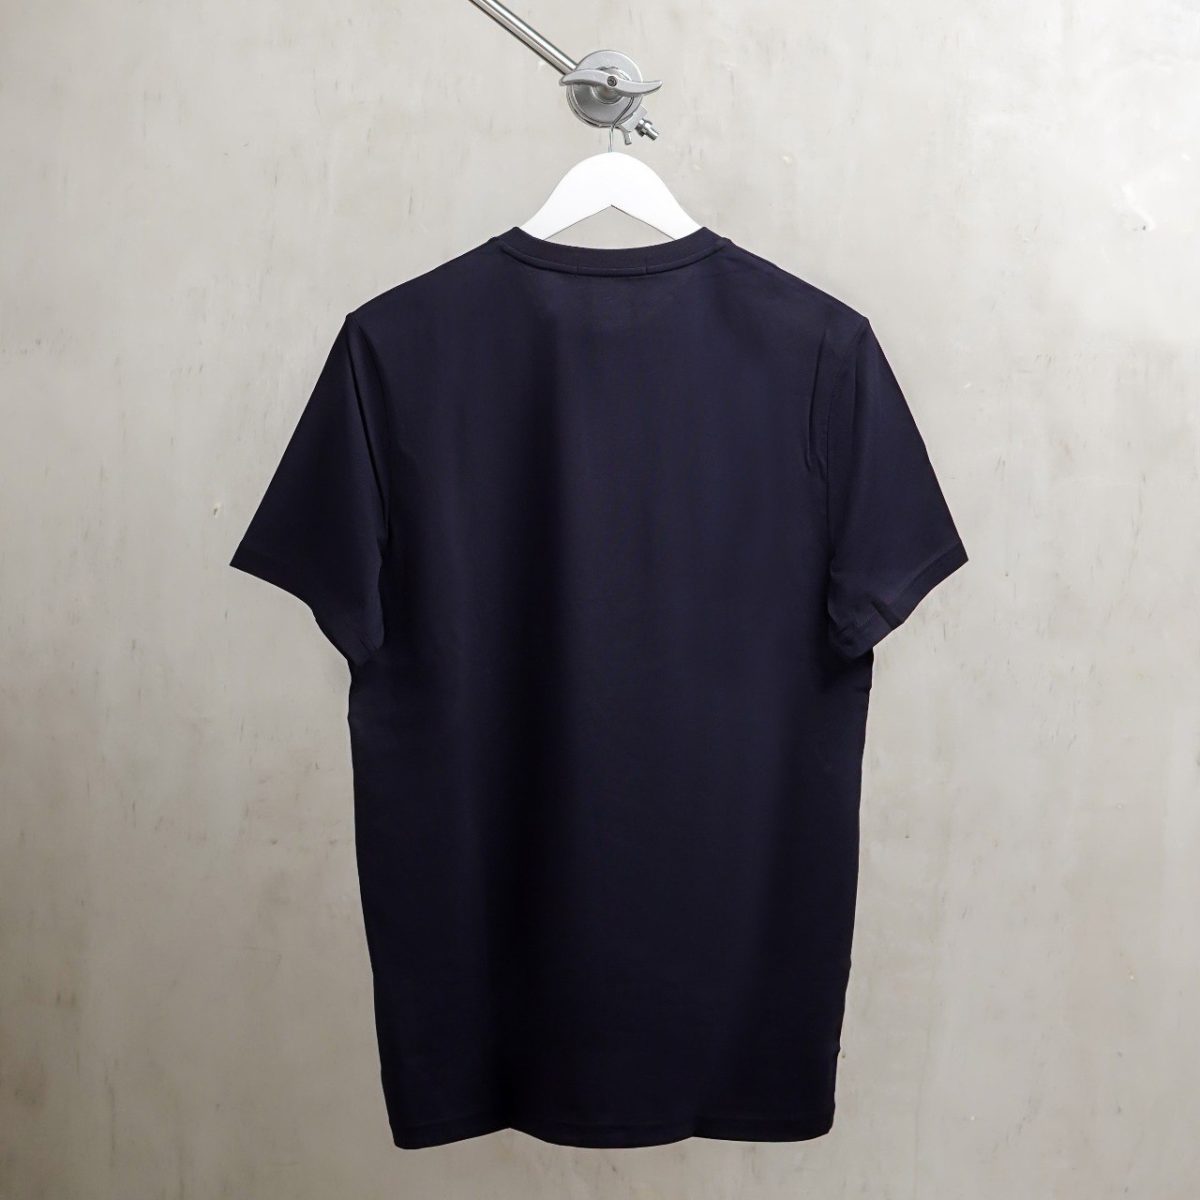 FRED PERRY NAVY TSHIRT